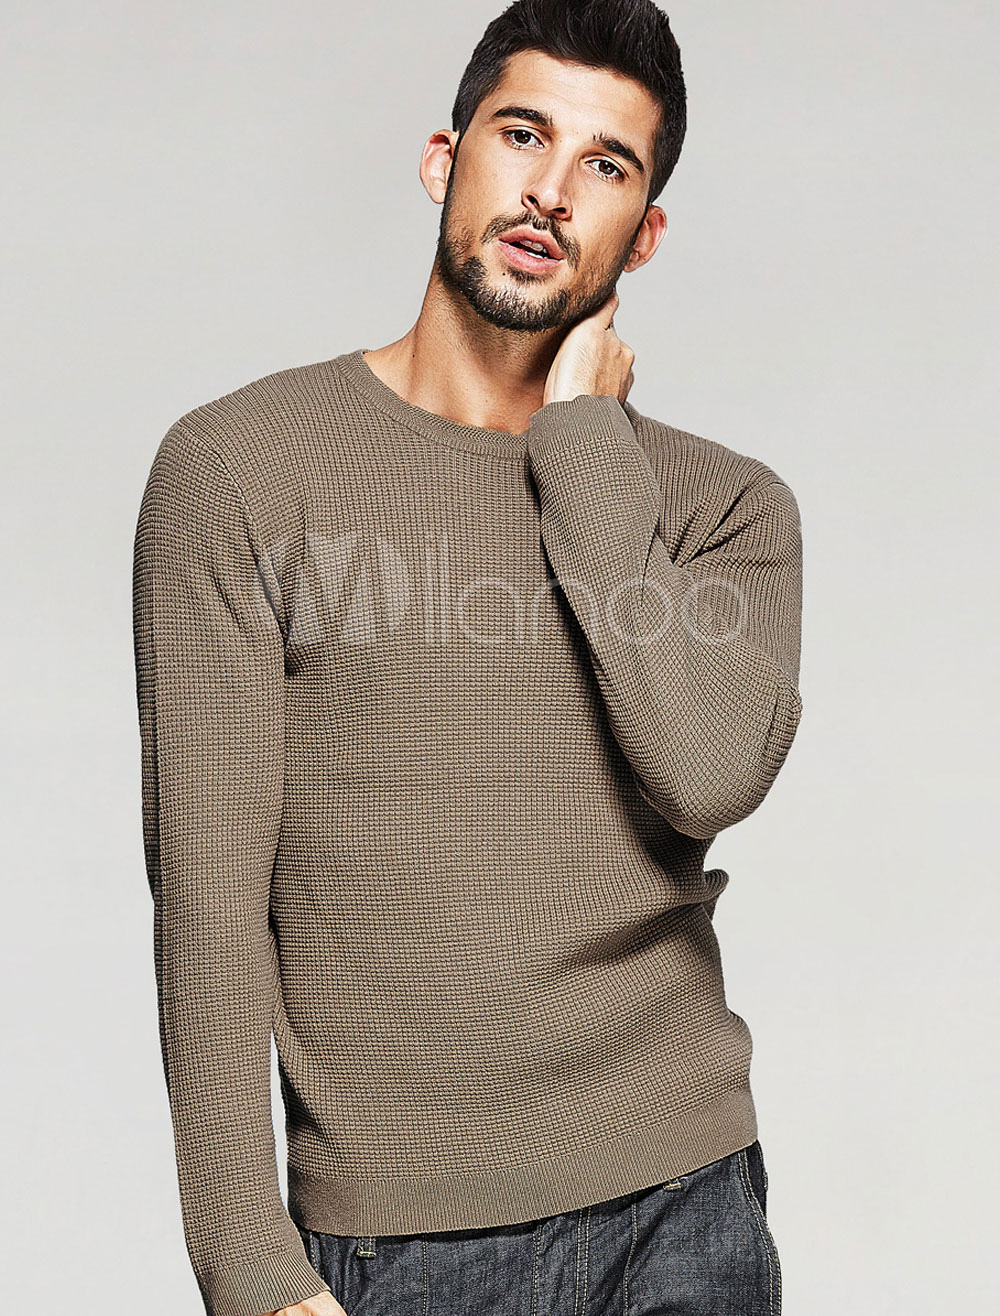 Khaki Pullover Sweater Round Neck Long Sleeve Regular Fit Sweater For ...